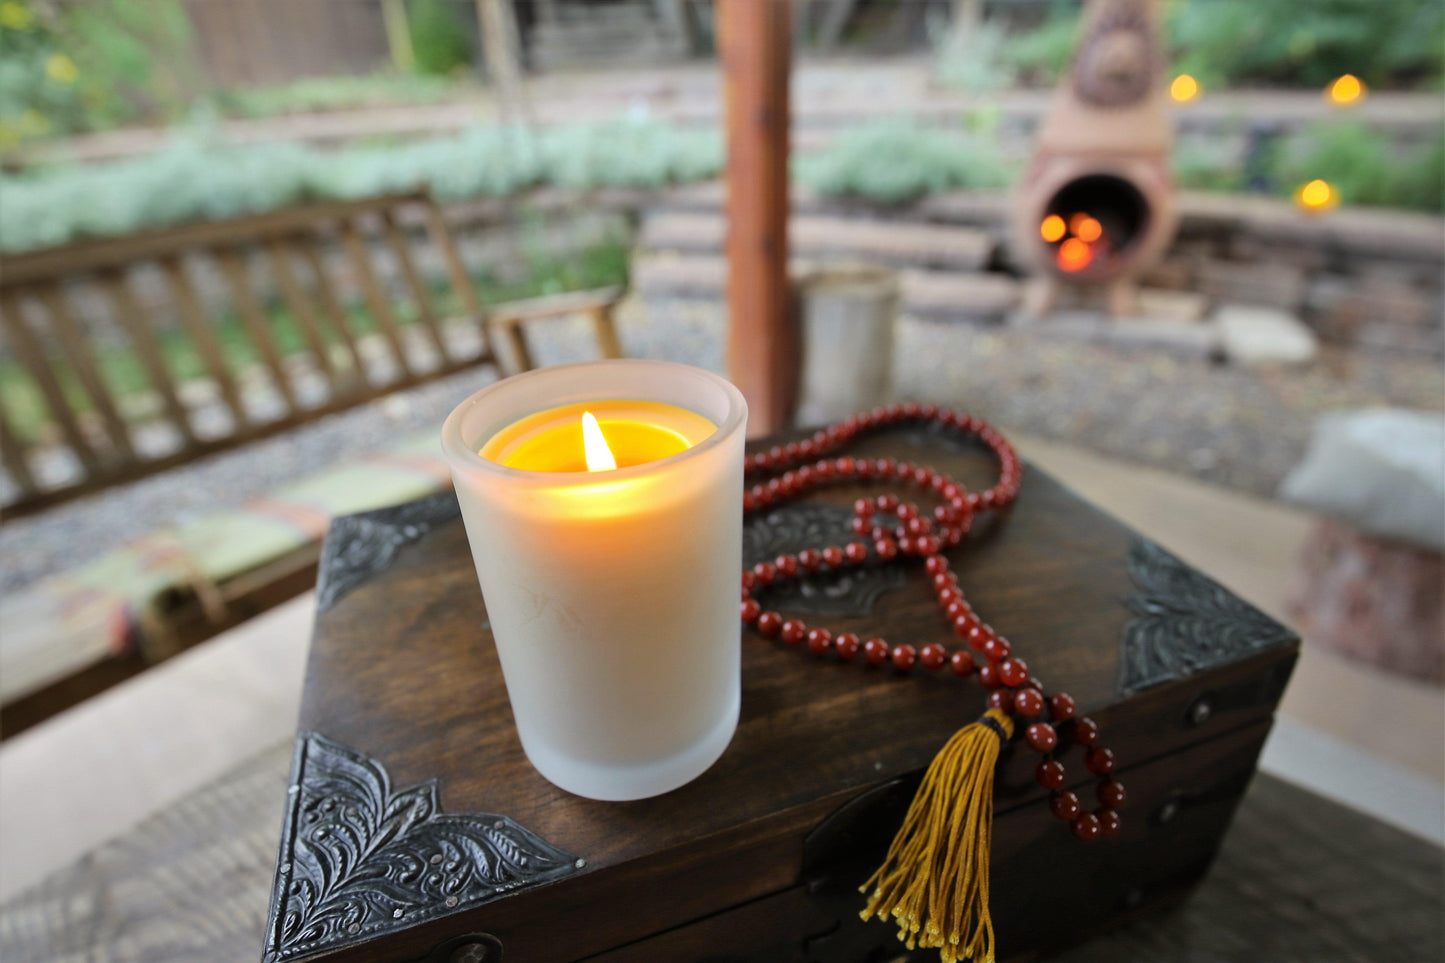 Lit Bluecorn Beeswax 8.5oz frosted candle outdoors. Candle is on wooden chest and red mala next to it, a bench and garden is slightly shown in the background. Wax is golden in color and in shows through only slightly in the frosted glass.